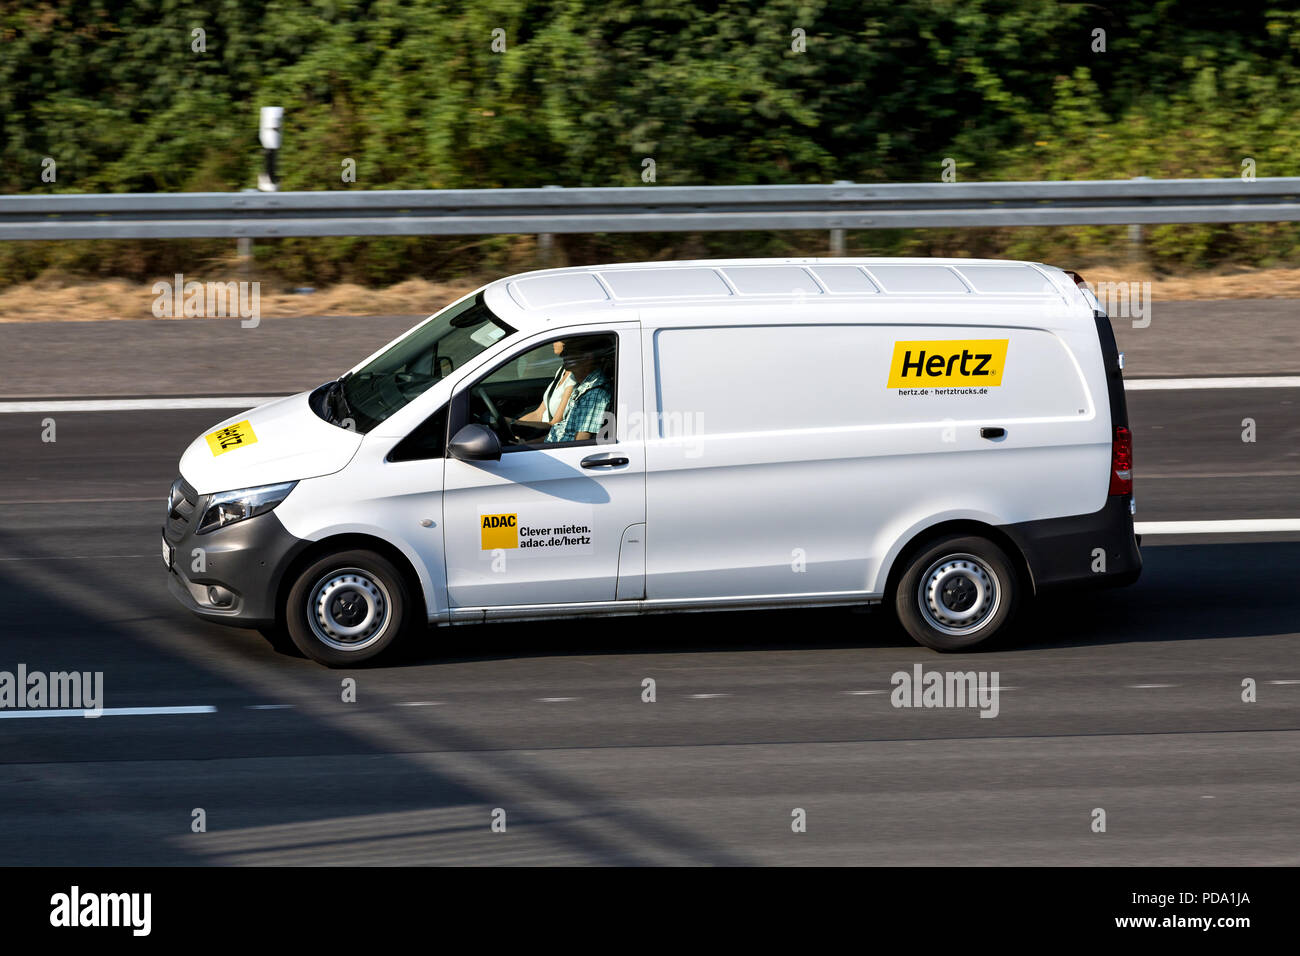 Mercedes-Benz Vito of Hertz on motorway. The Hertz Corporation is an American car rental company based in Estero, Florida. Stock Photo